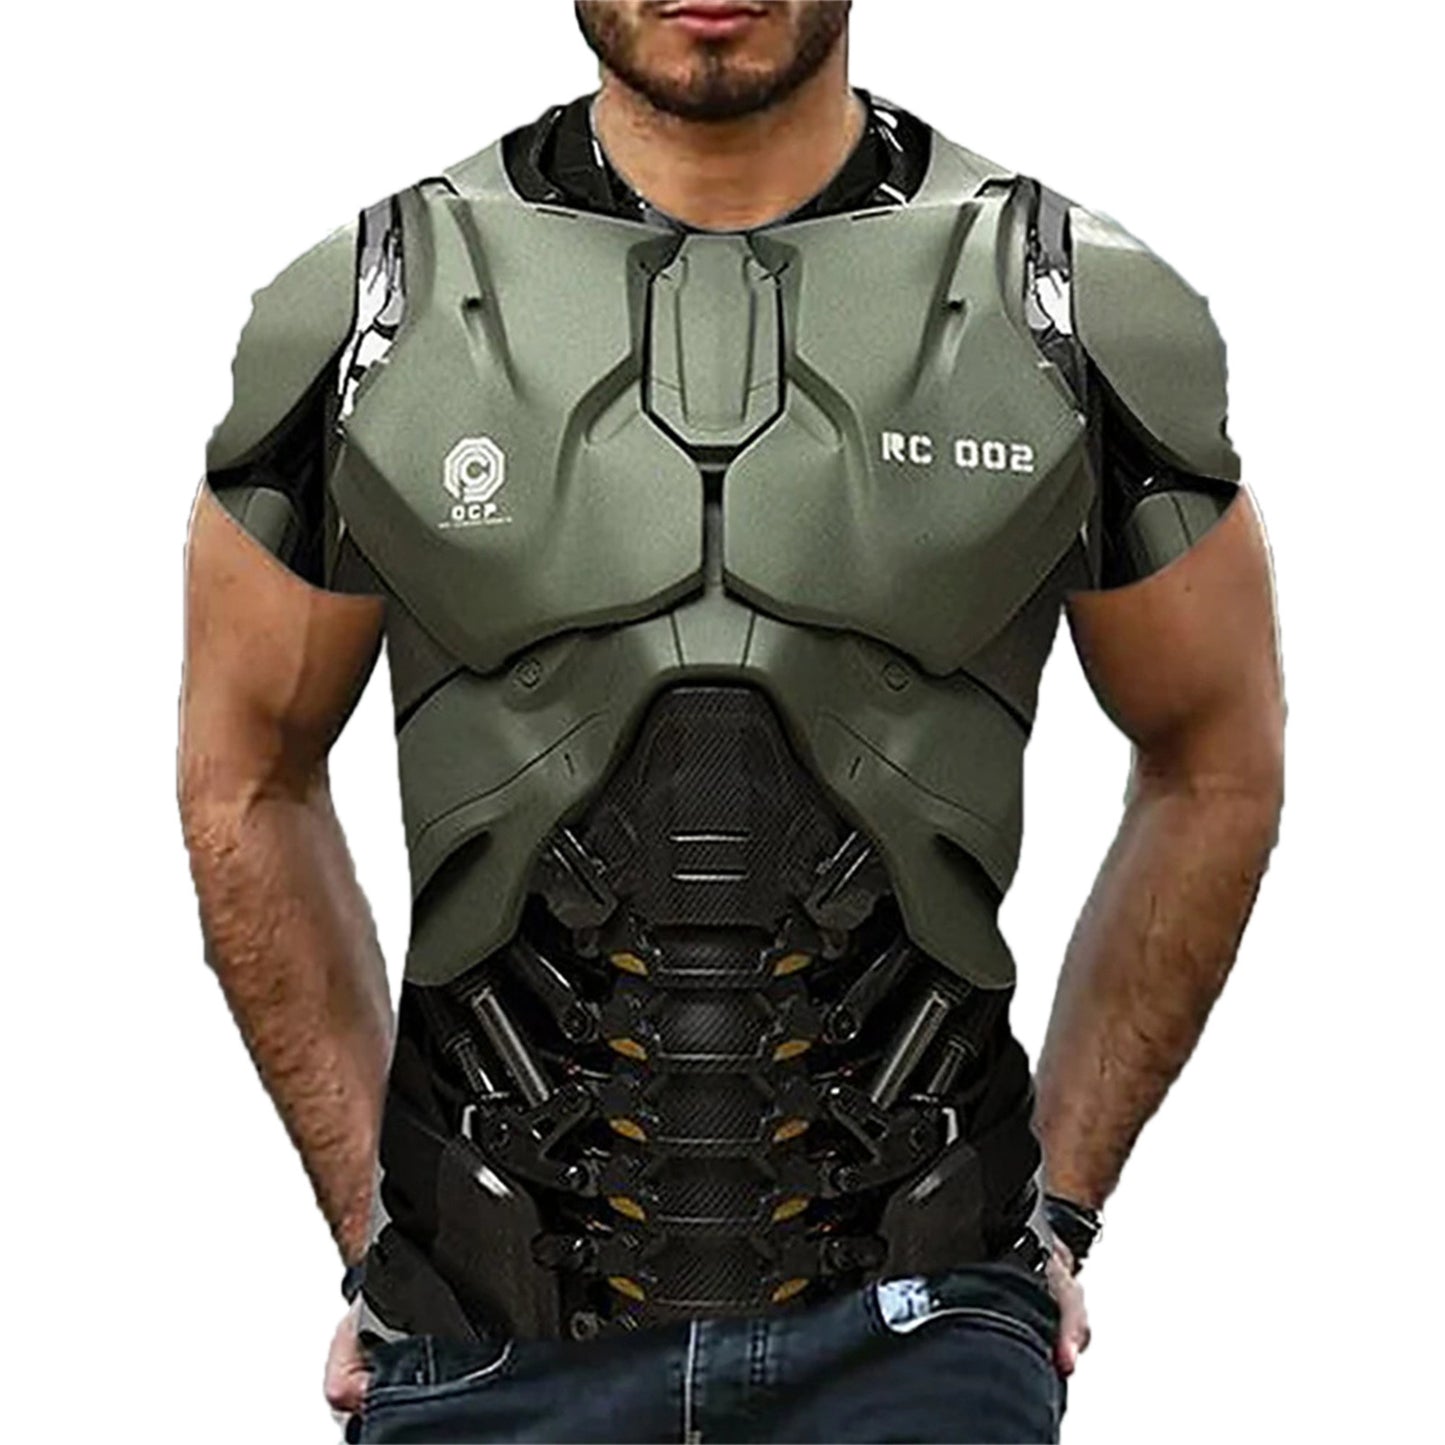 Future tech role-playing Armor Pattern 3d Digital Printing Short-sleeved T-shirt-DungeonDice1